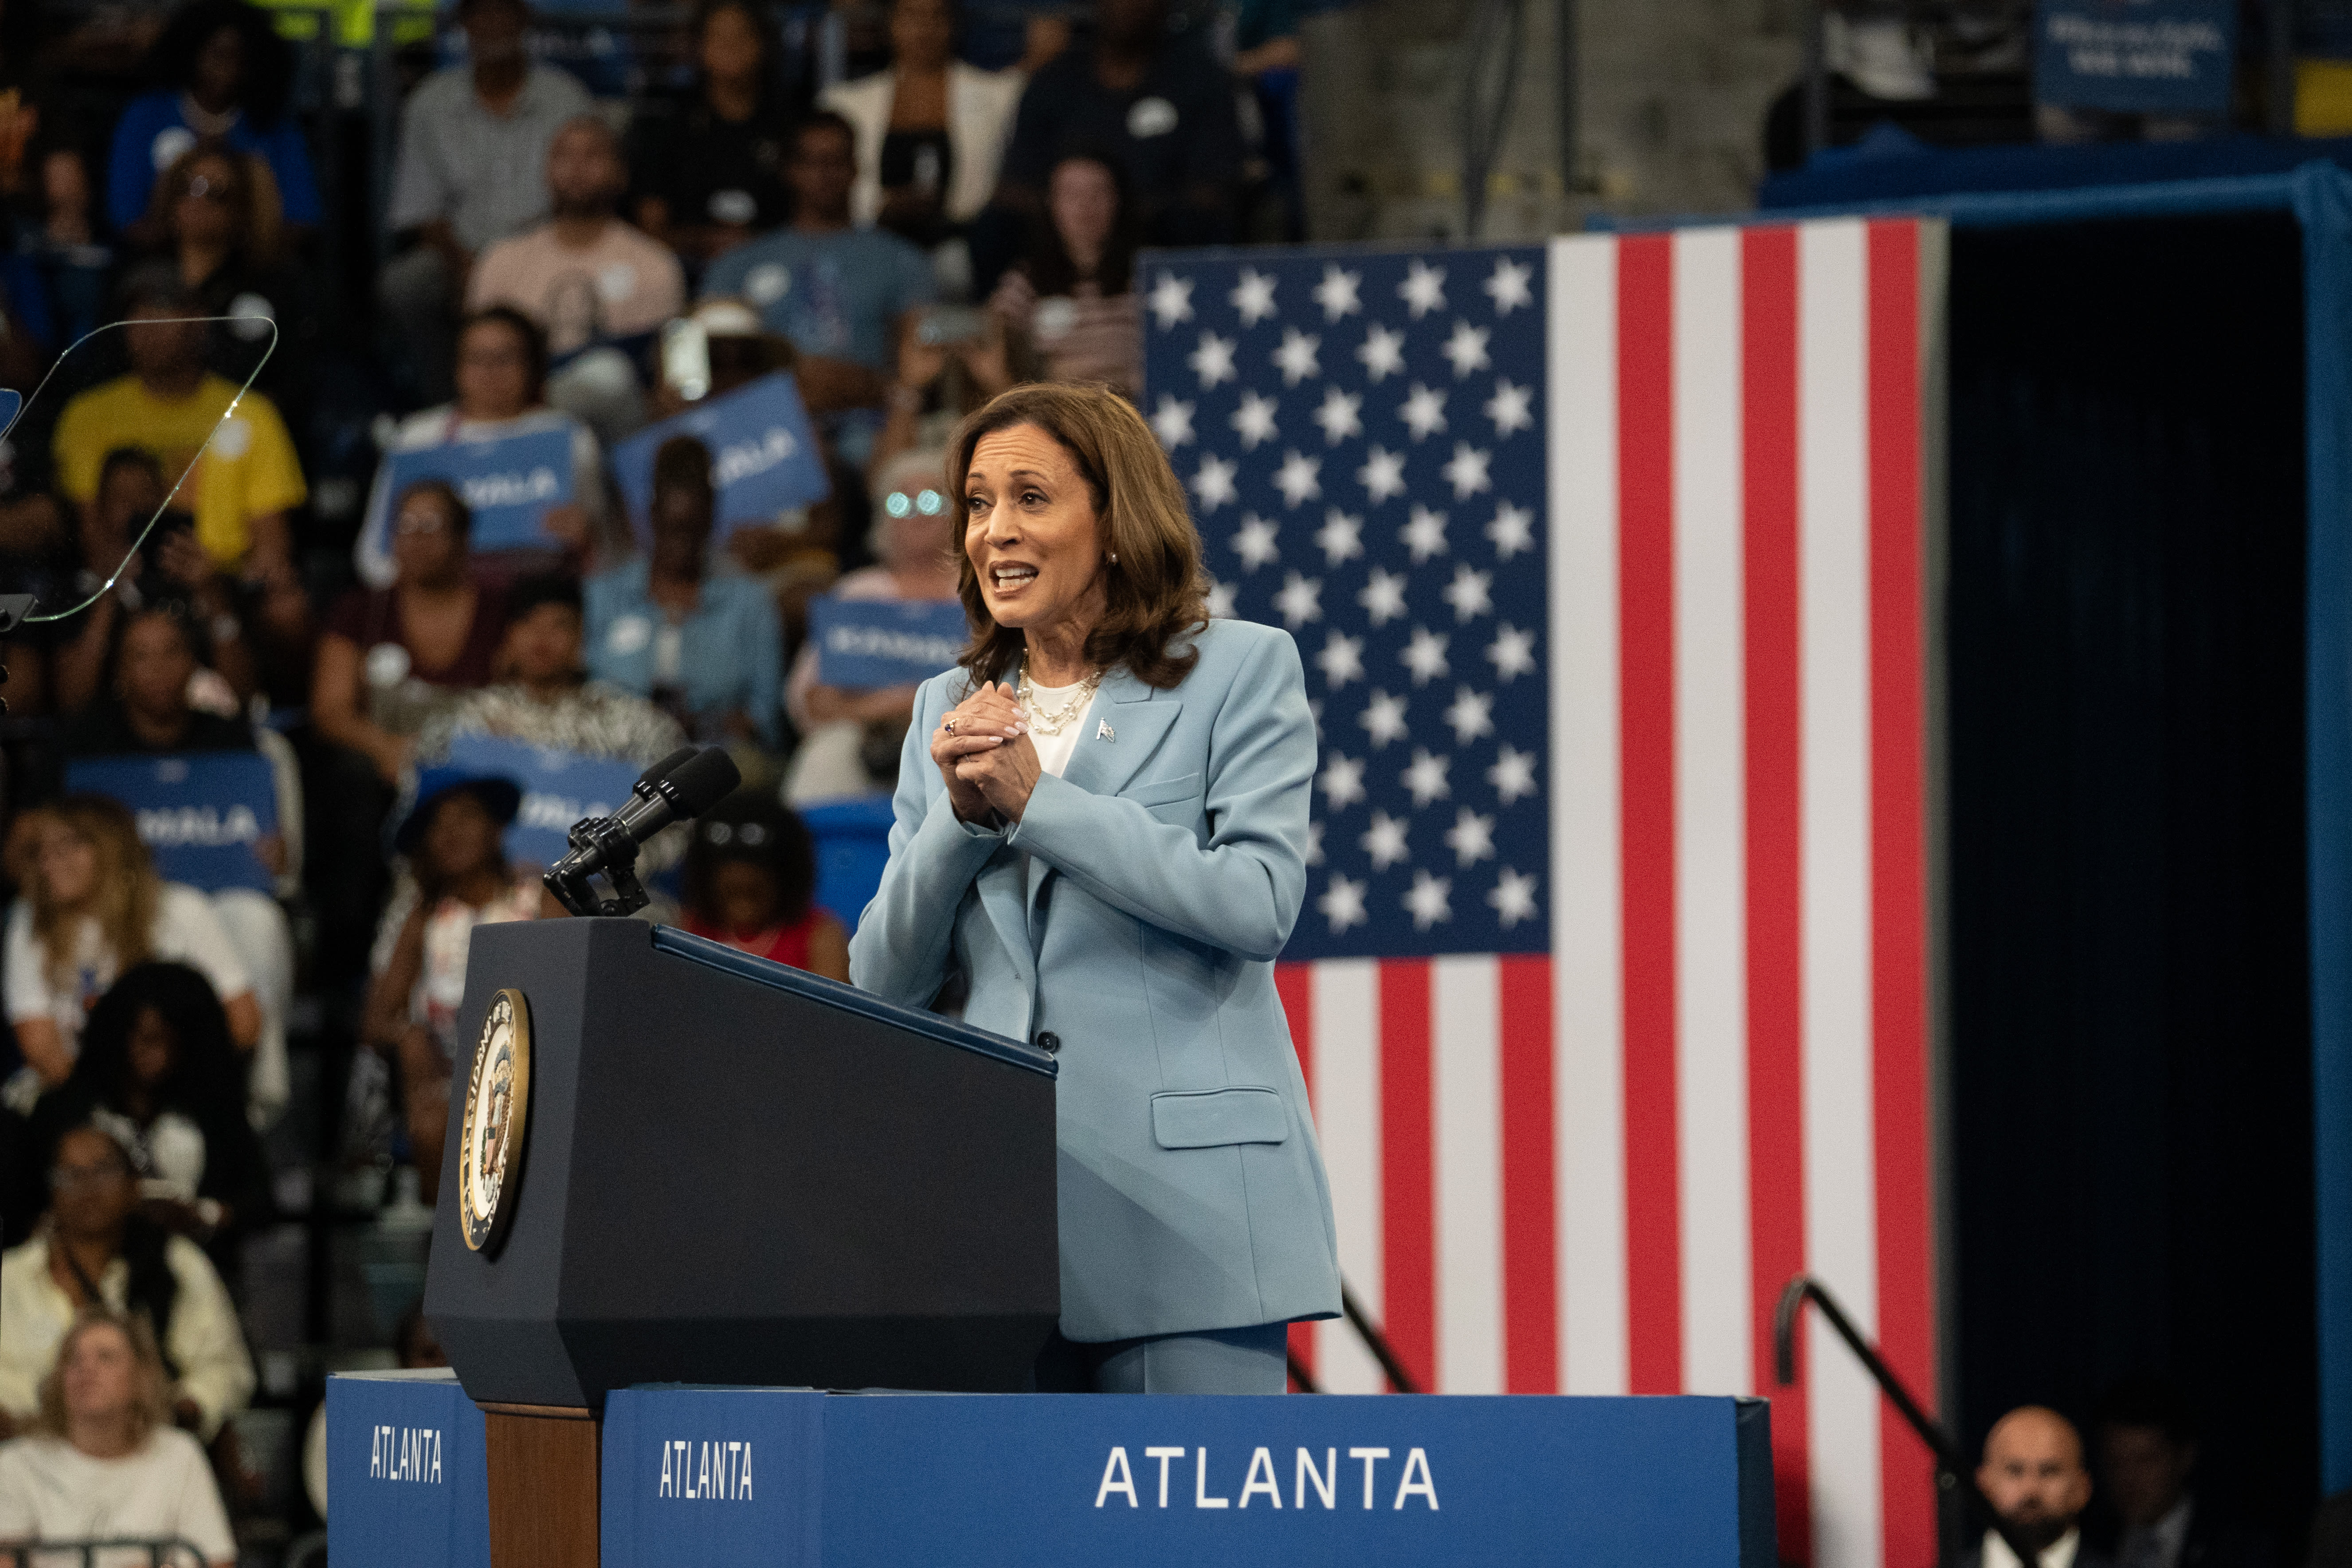 ‘Say it to my face’: Harris trolls Trump at star-studded Atlanta campaign rally